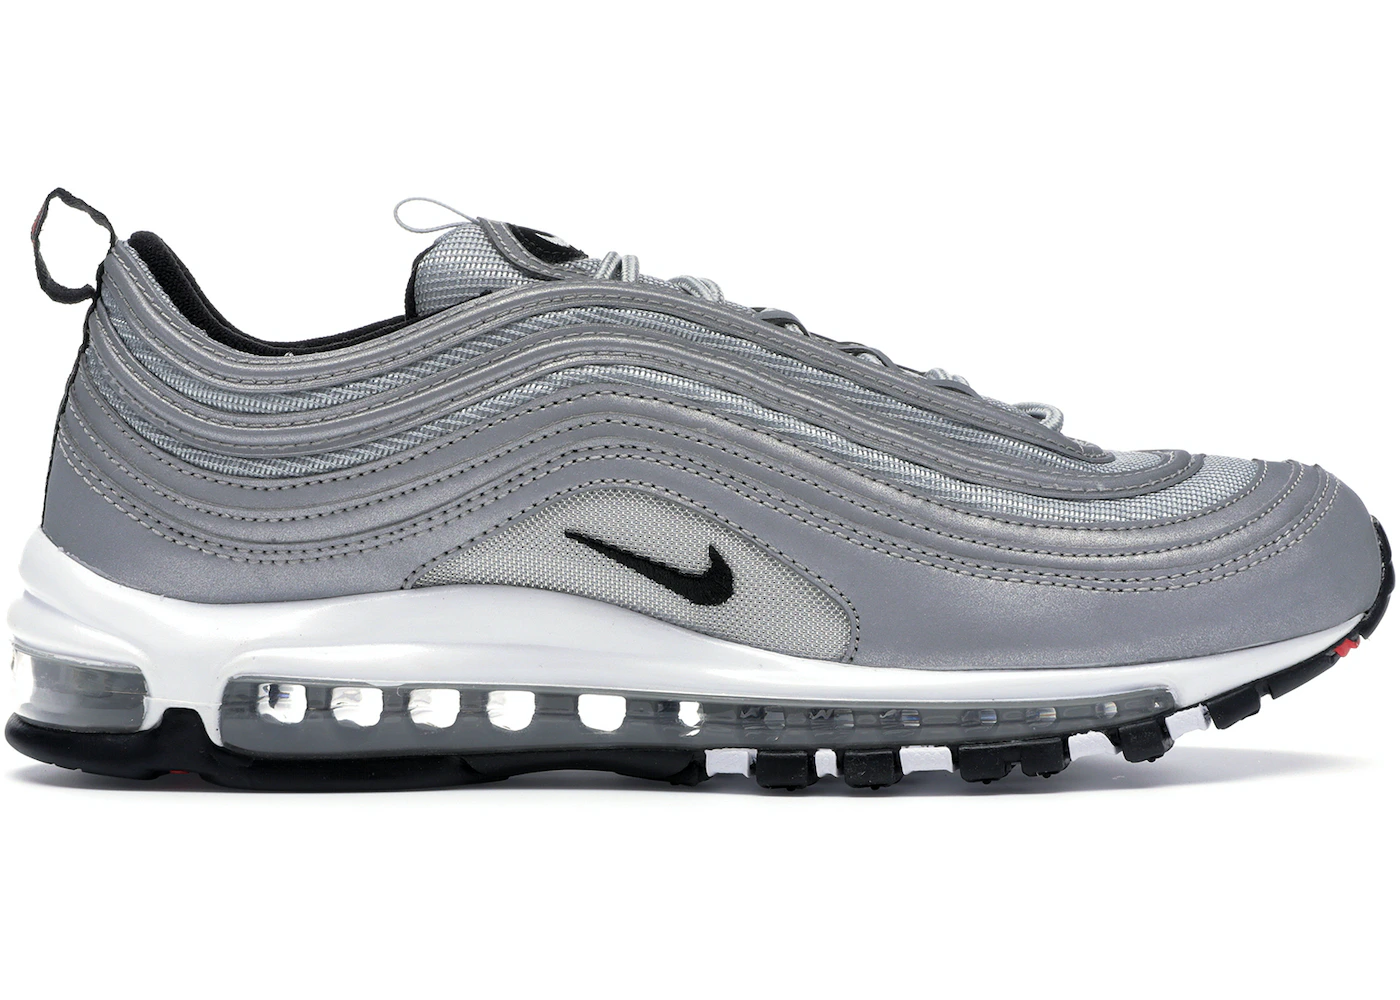 Counting insects mimic nickel Nike Air Max 97 Reflective Silver - 312834-007